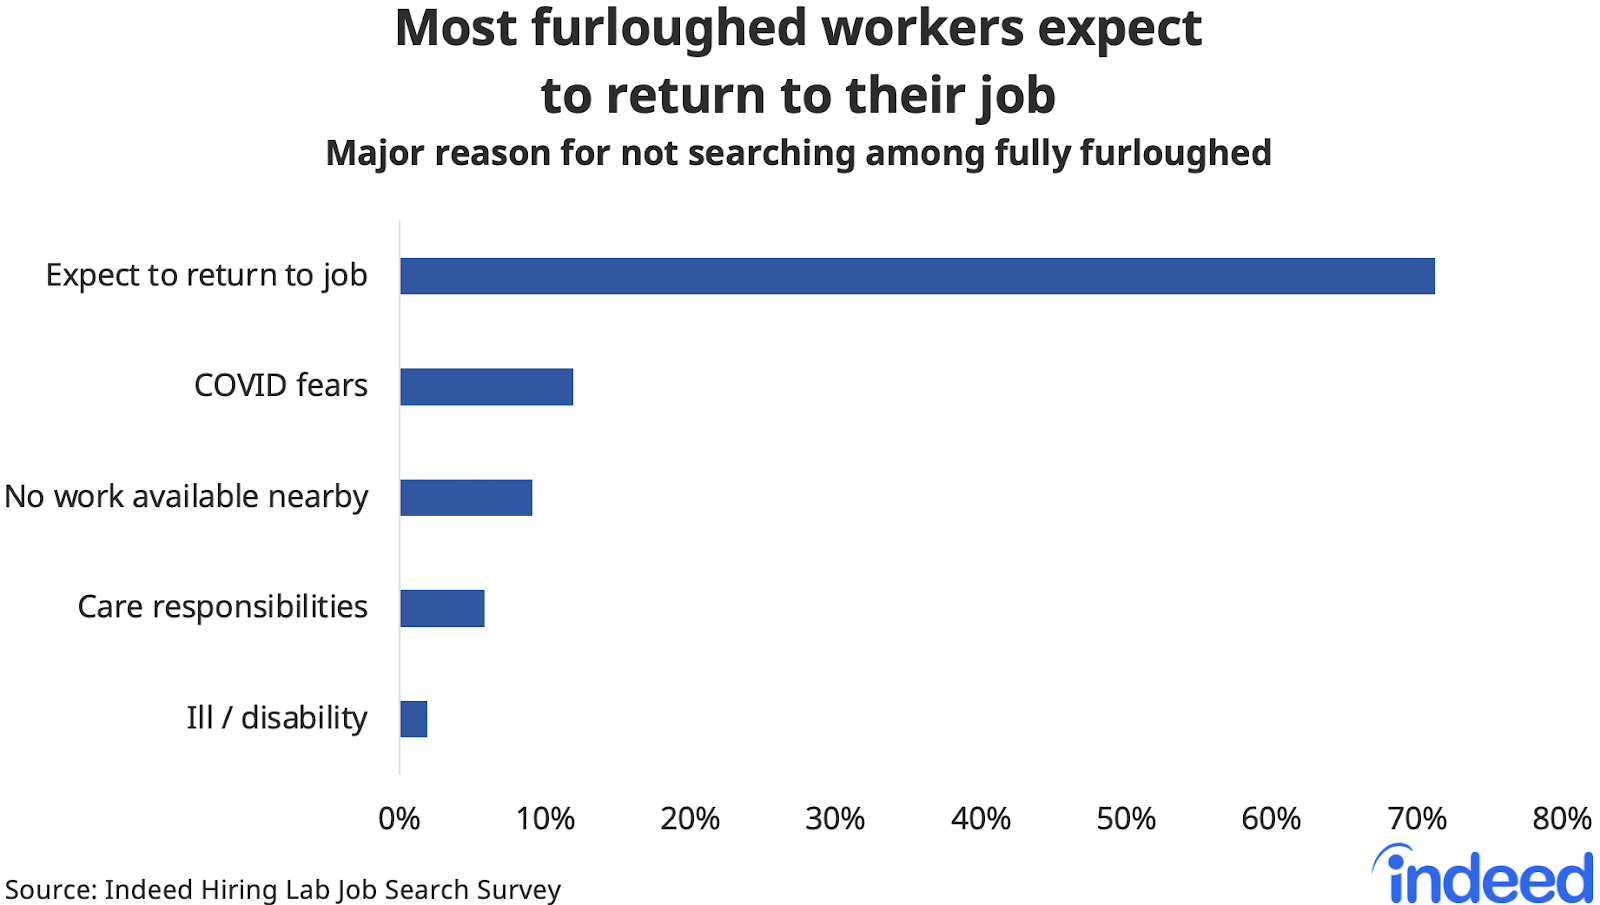 Bar graph titled “Most furloughed workers expect to return to their job.”